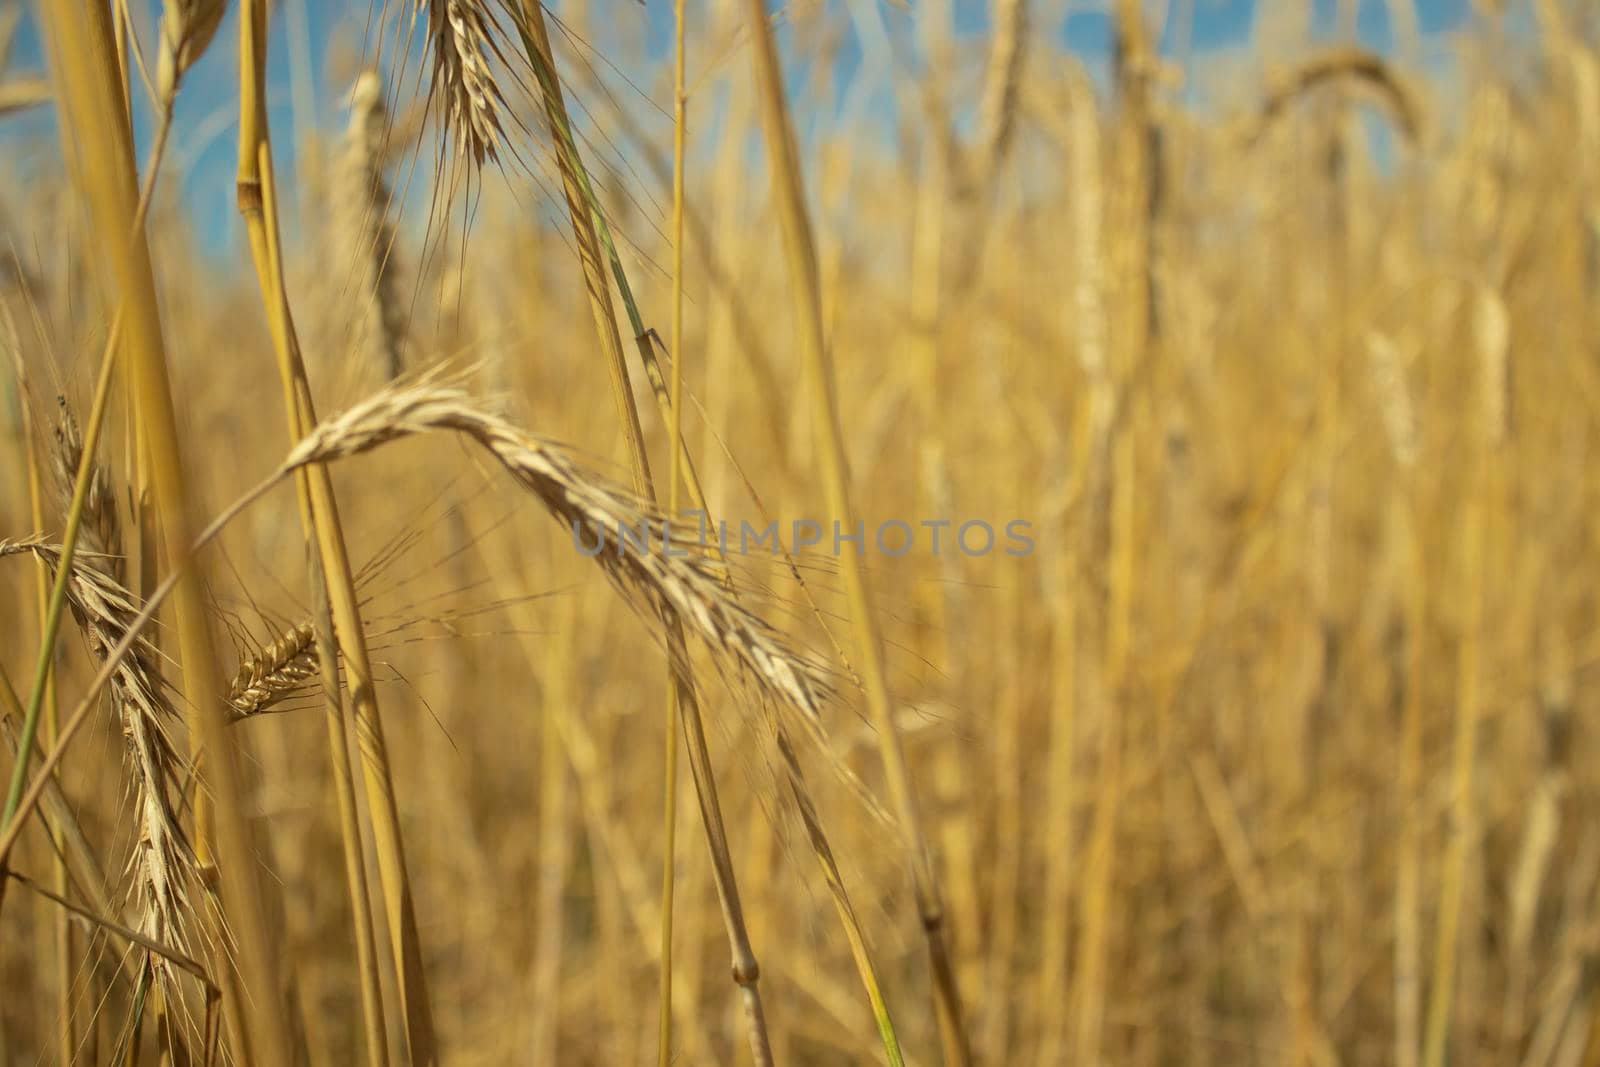 landscape field of ripening wheat against blue sky. Spikelets of wheat with grain shakes wind. grain harvest ripens summer. agricultural farm healthy food business concept. environmentally organic by oliavesna